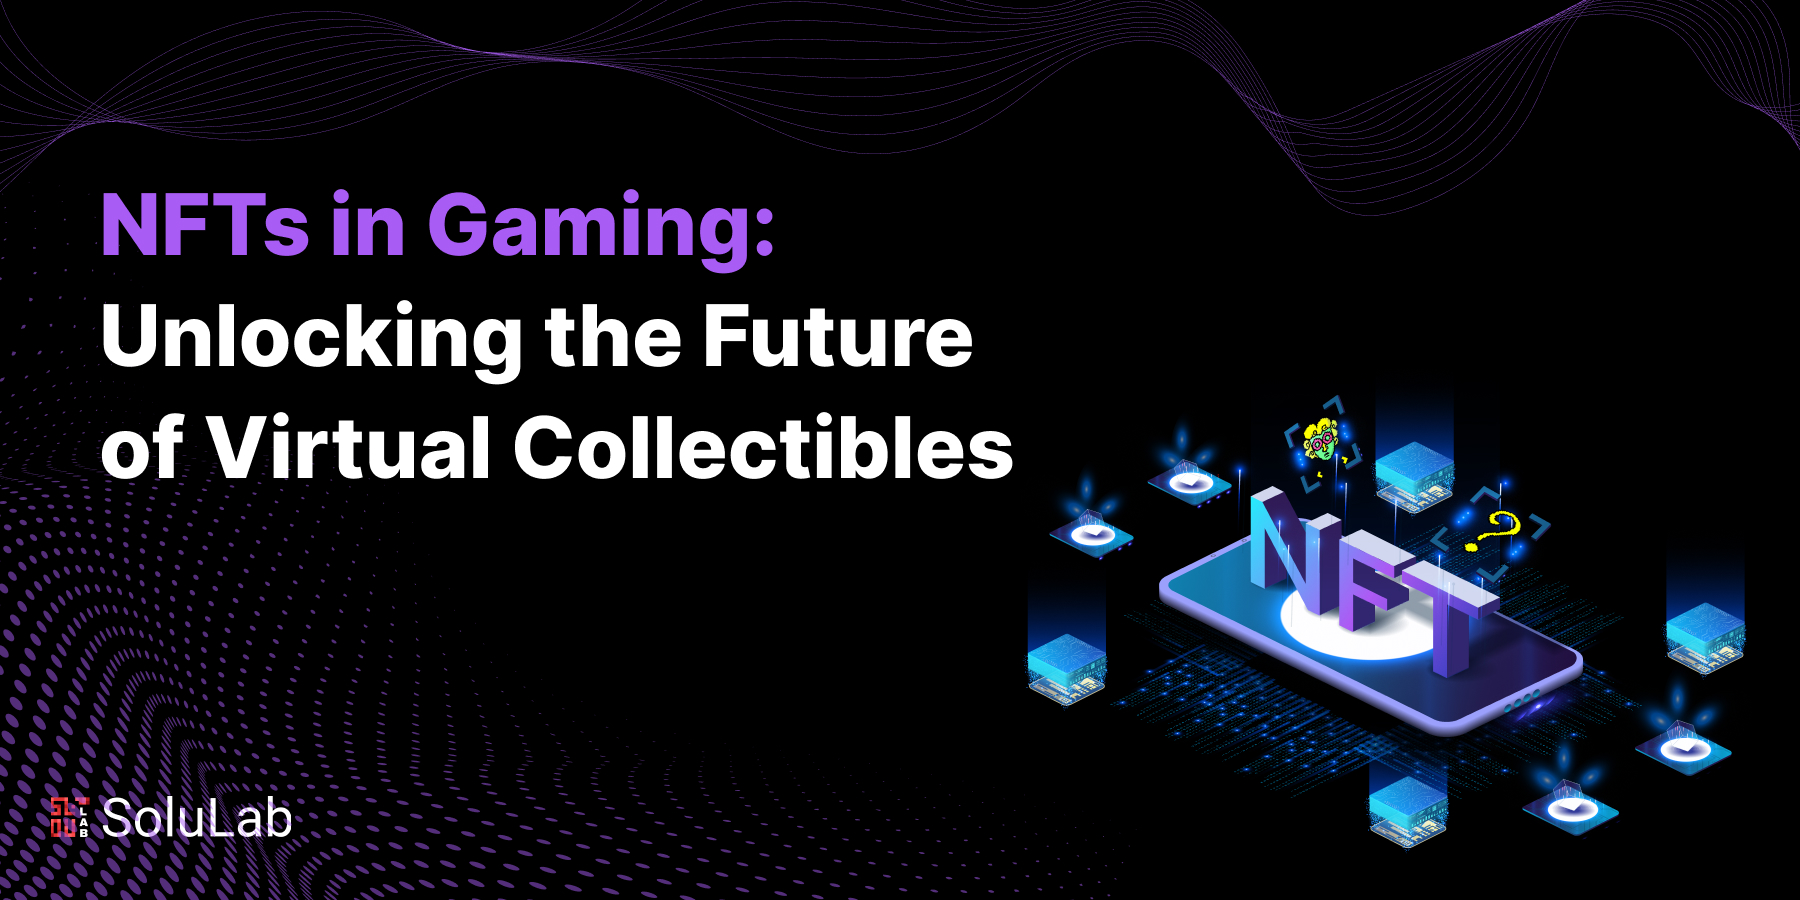 NFTs in Gaming: Unlocking the Future of Virtual Collectibles